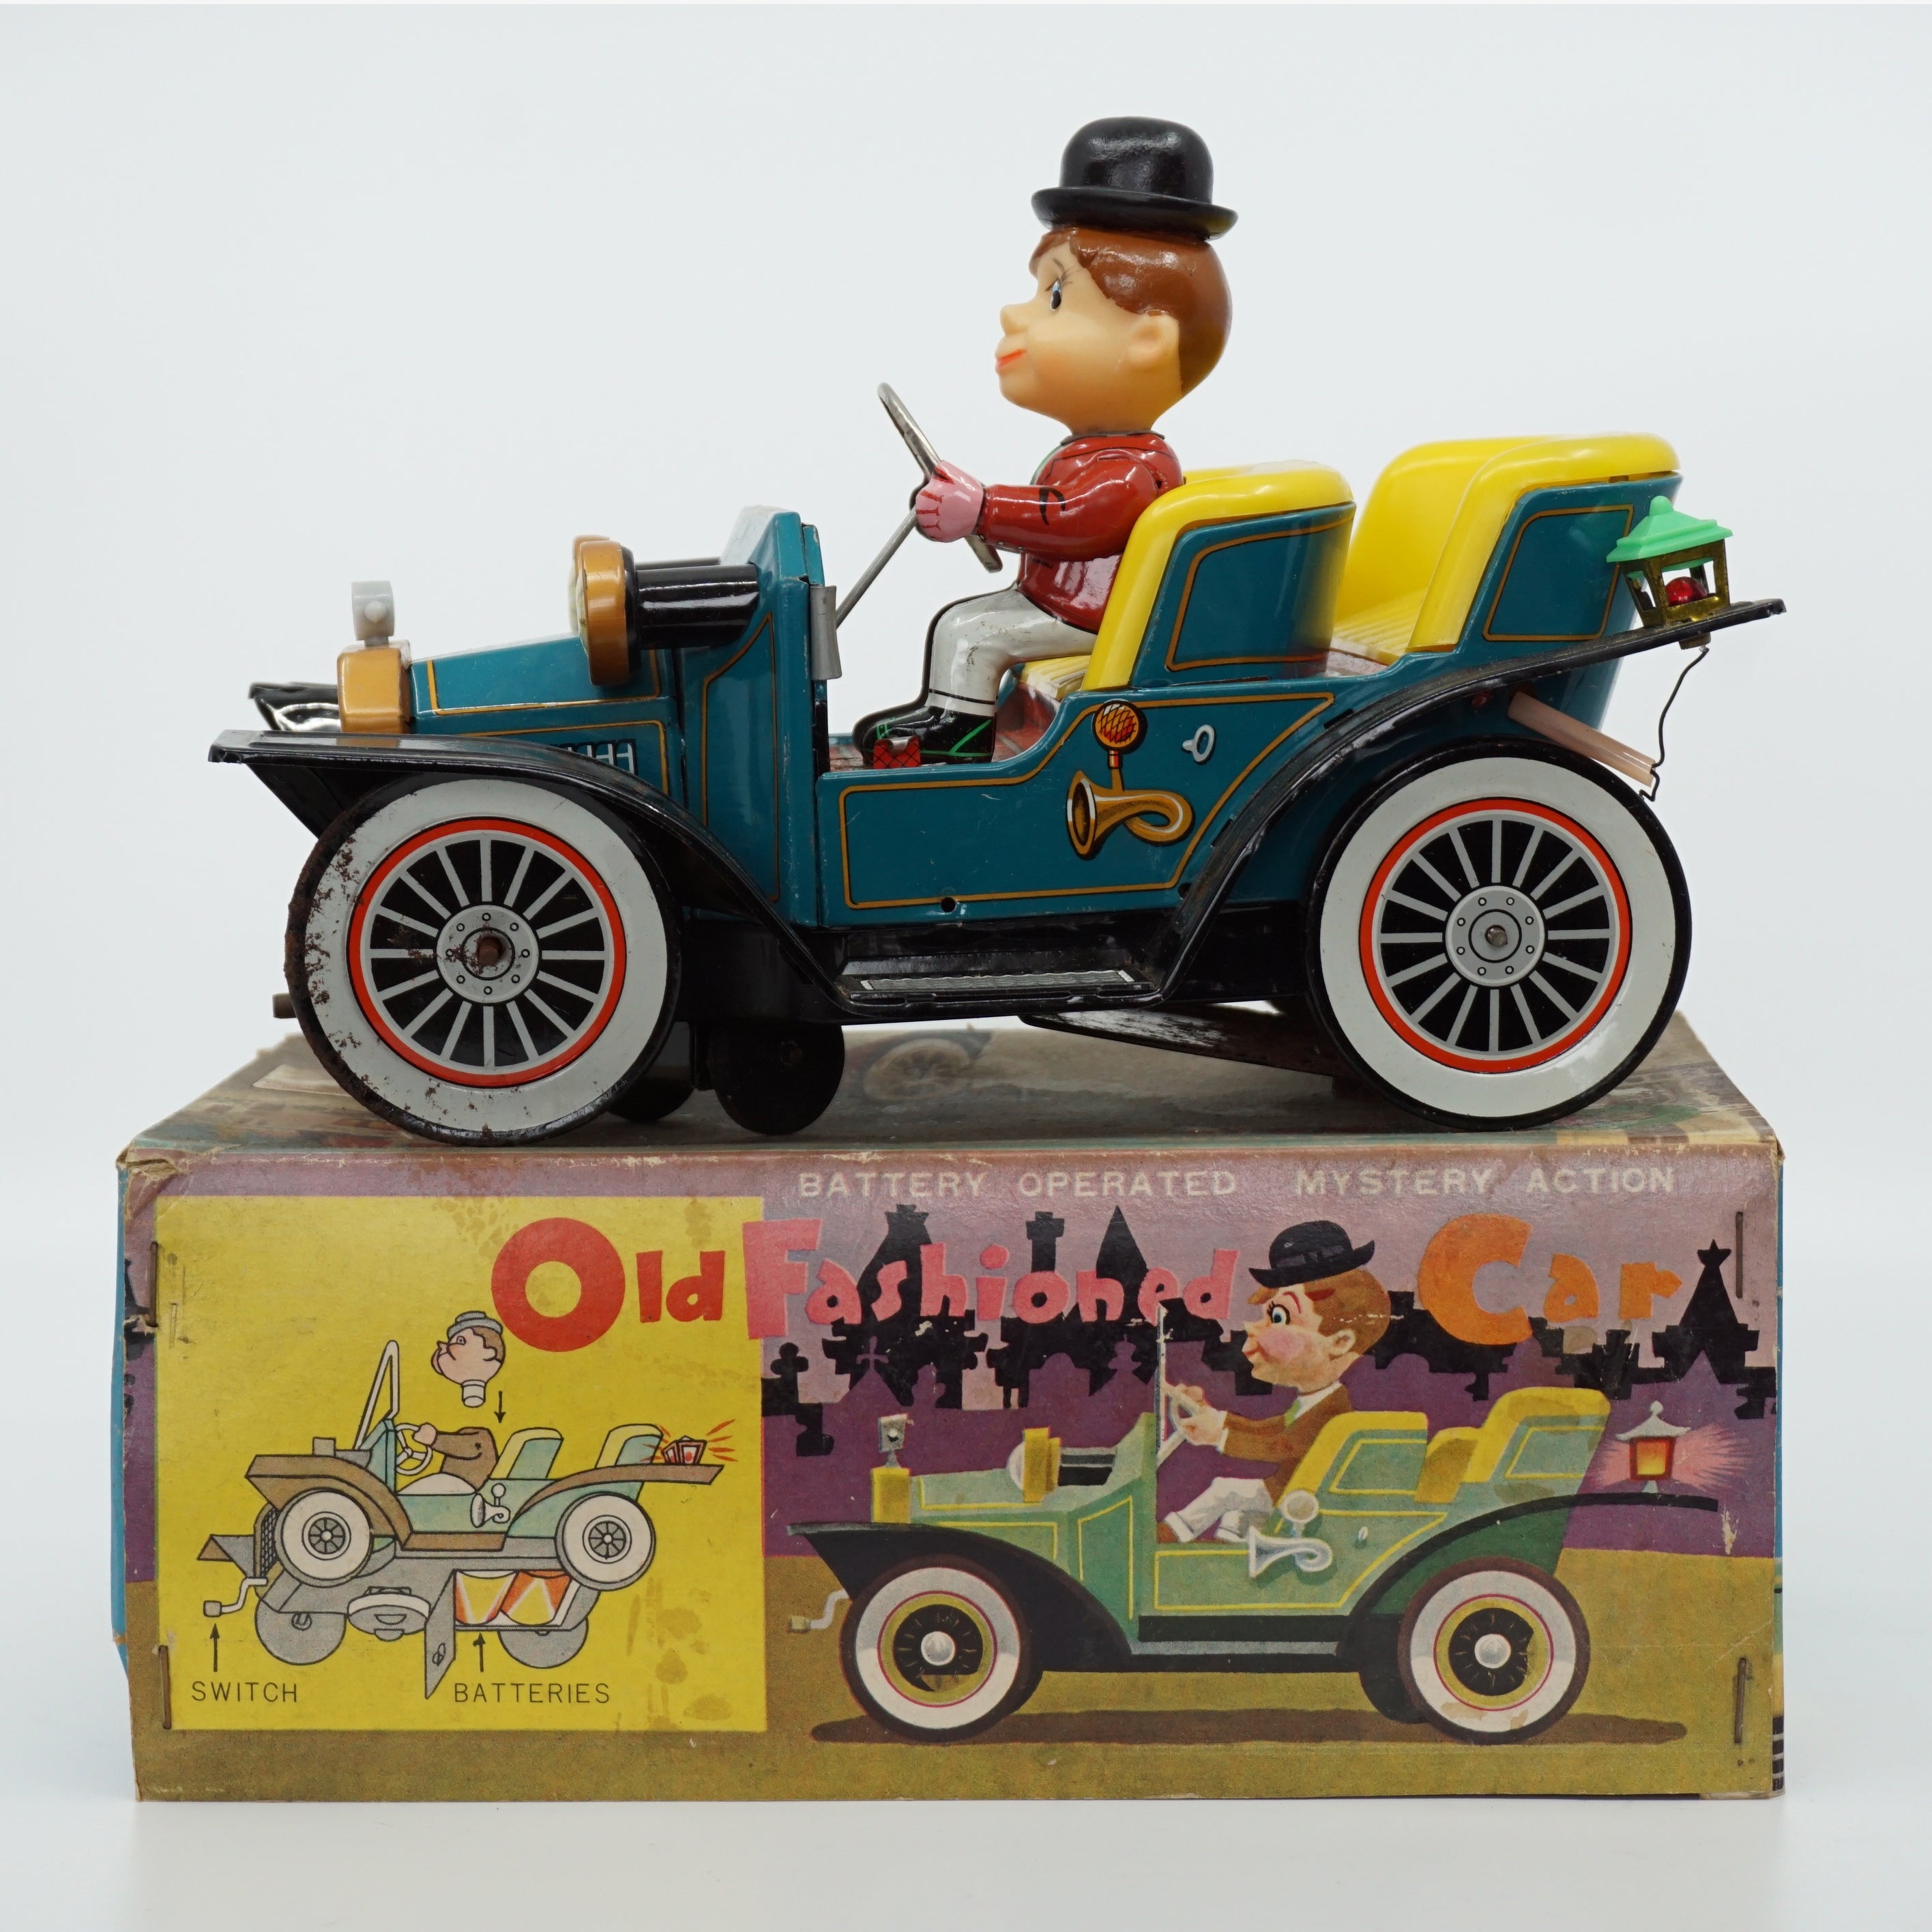 1970s "Old Fashion Car" Battery Operated Mystery Action. Made in Japan